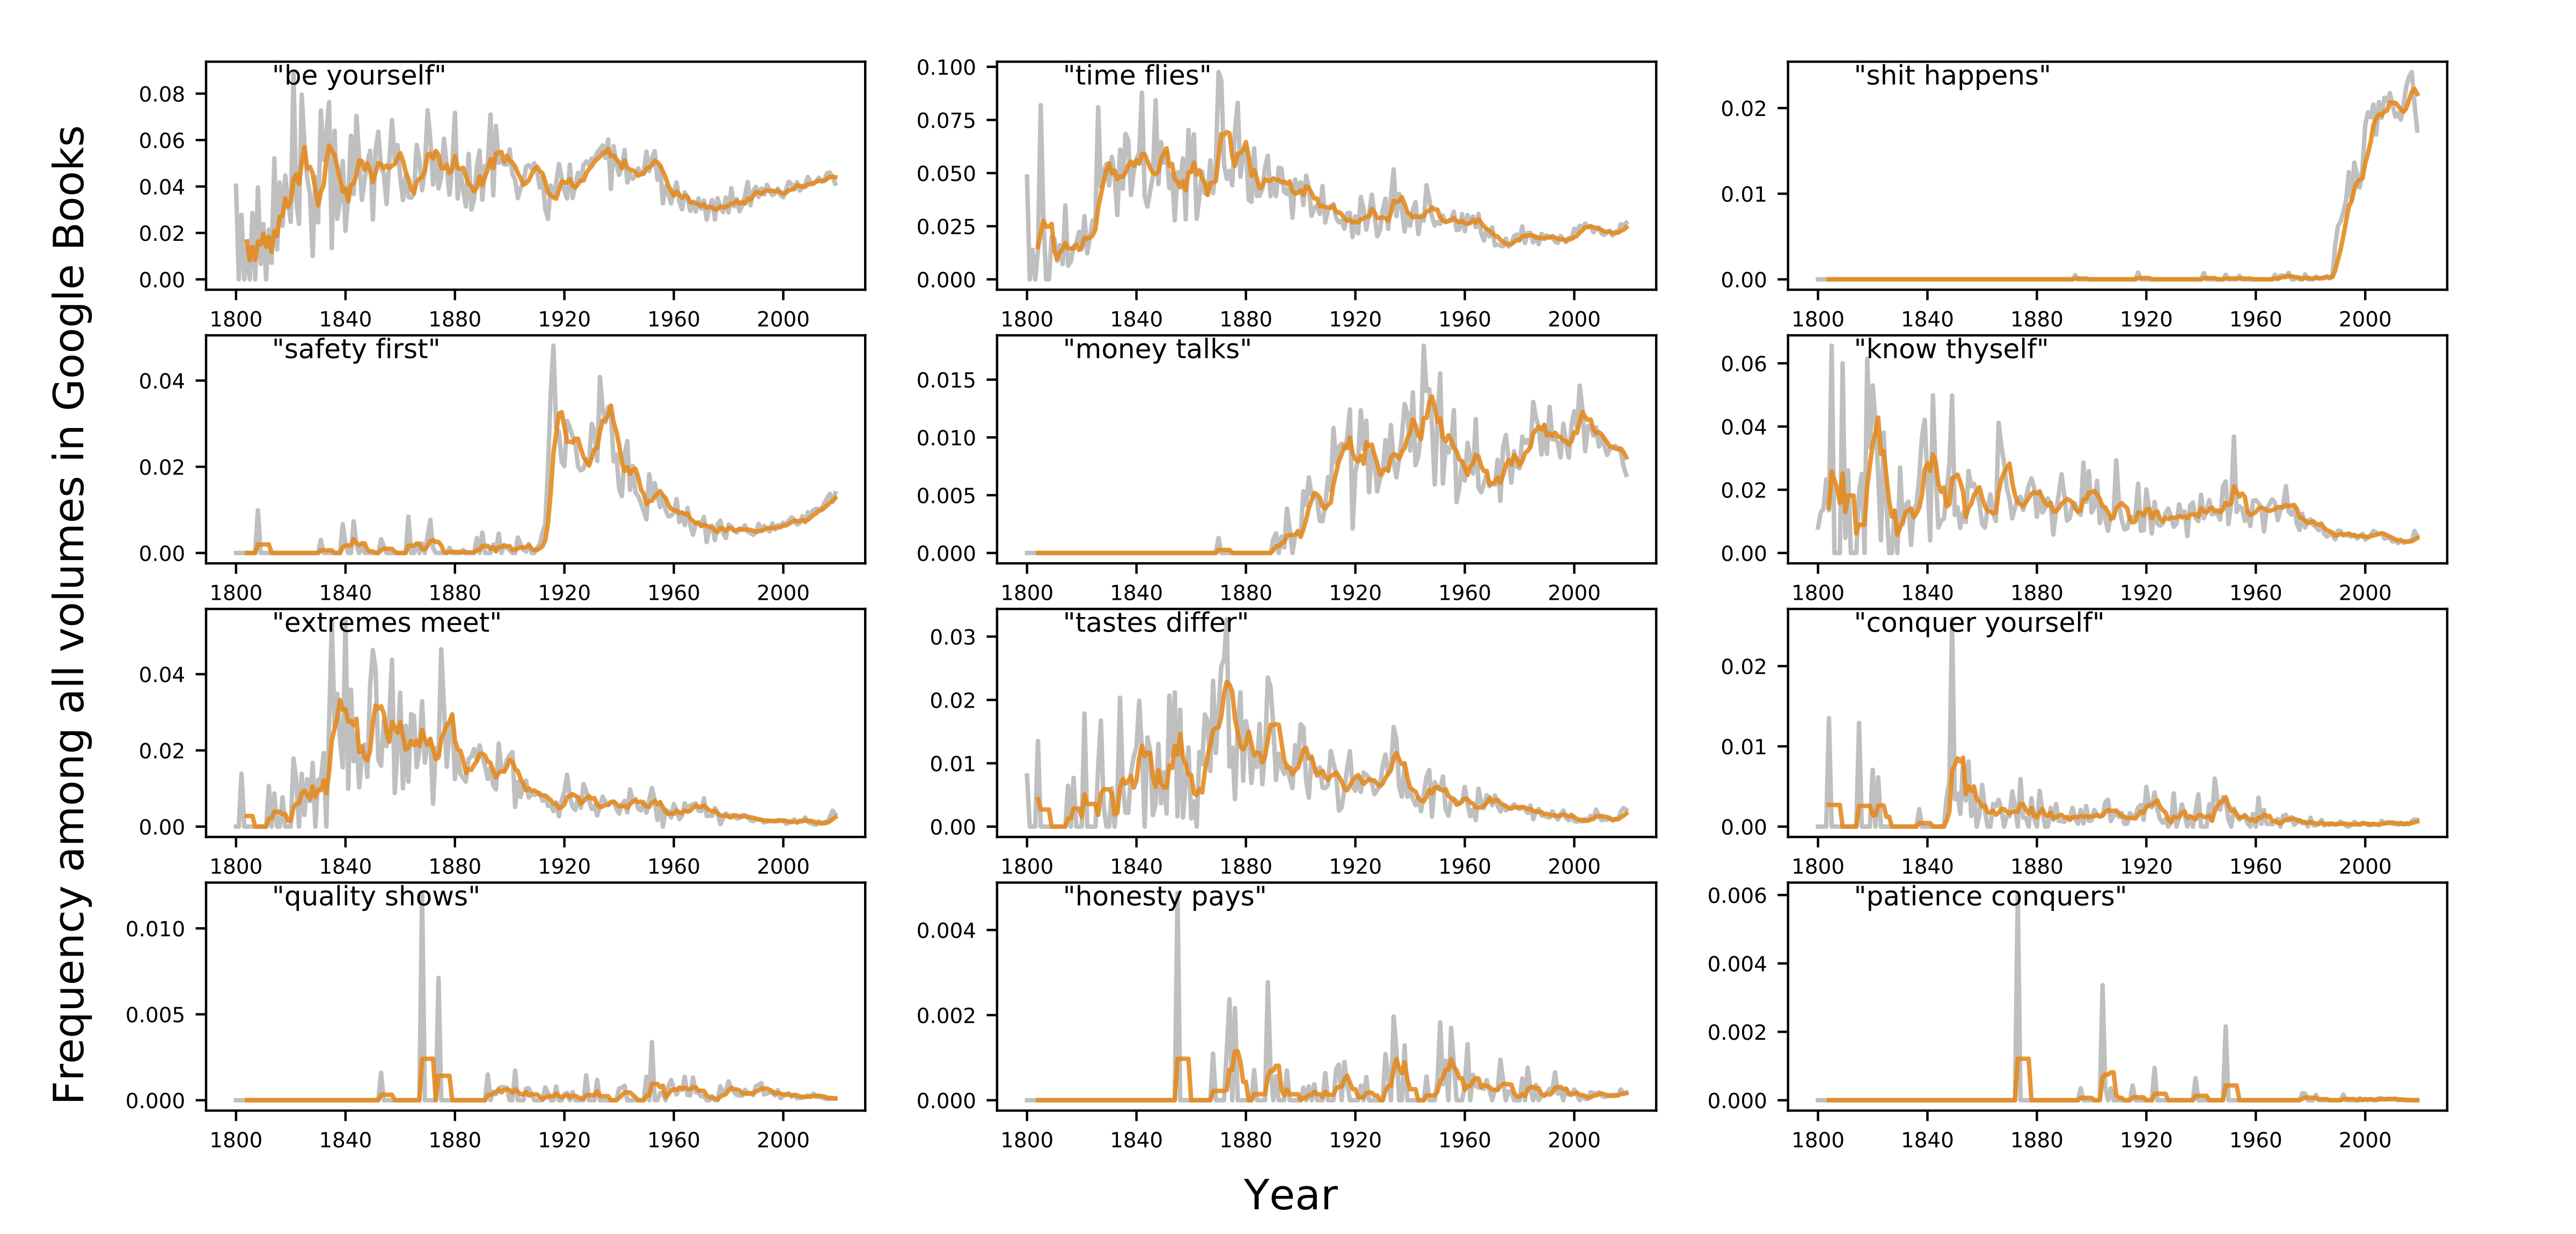 nine frequency charts showing the frequencies of key phrases over time. The y axes all show frequencies and the x axes show years from 1800-2000